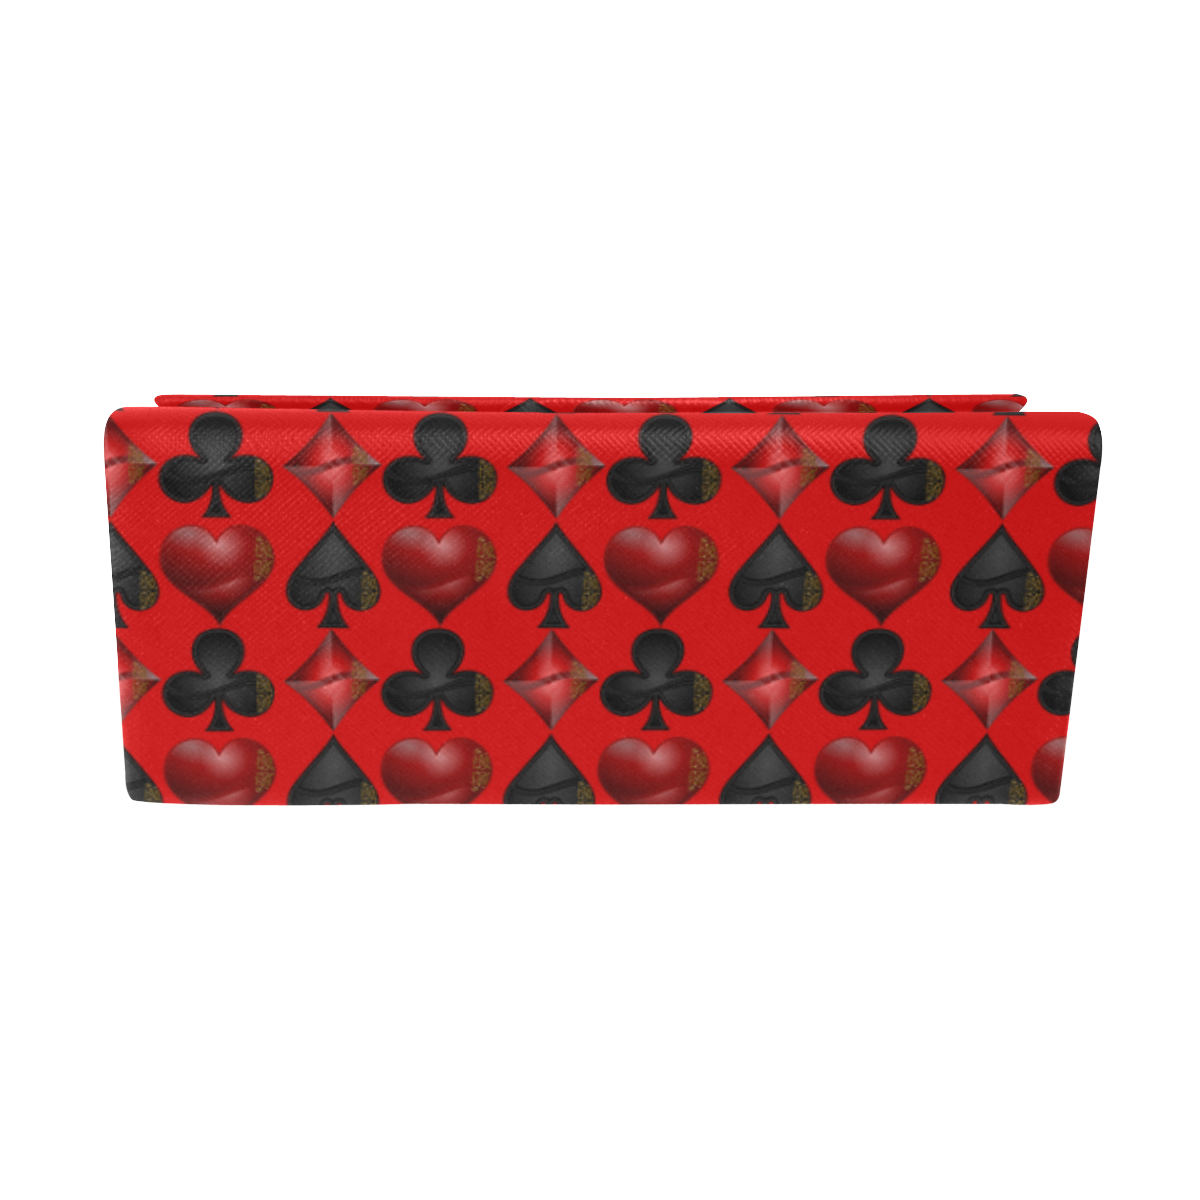 Las Vegas Black and Red Casino Poker Card Shapes on Red Custom Foldable Glasses Case